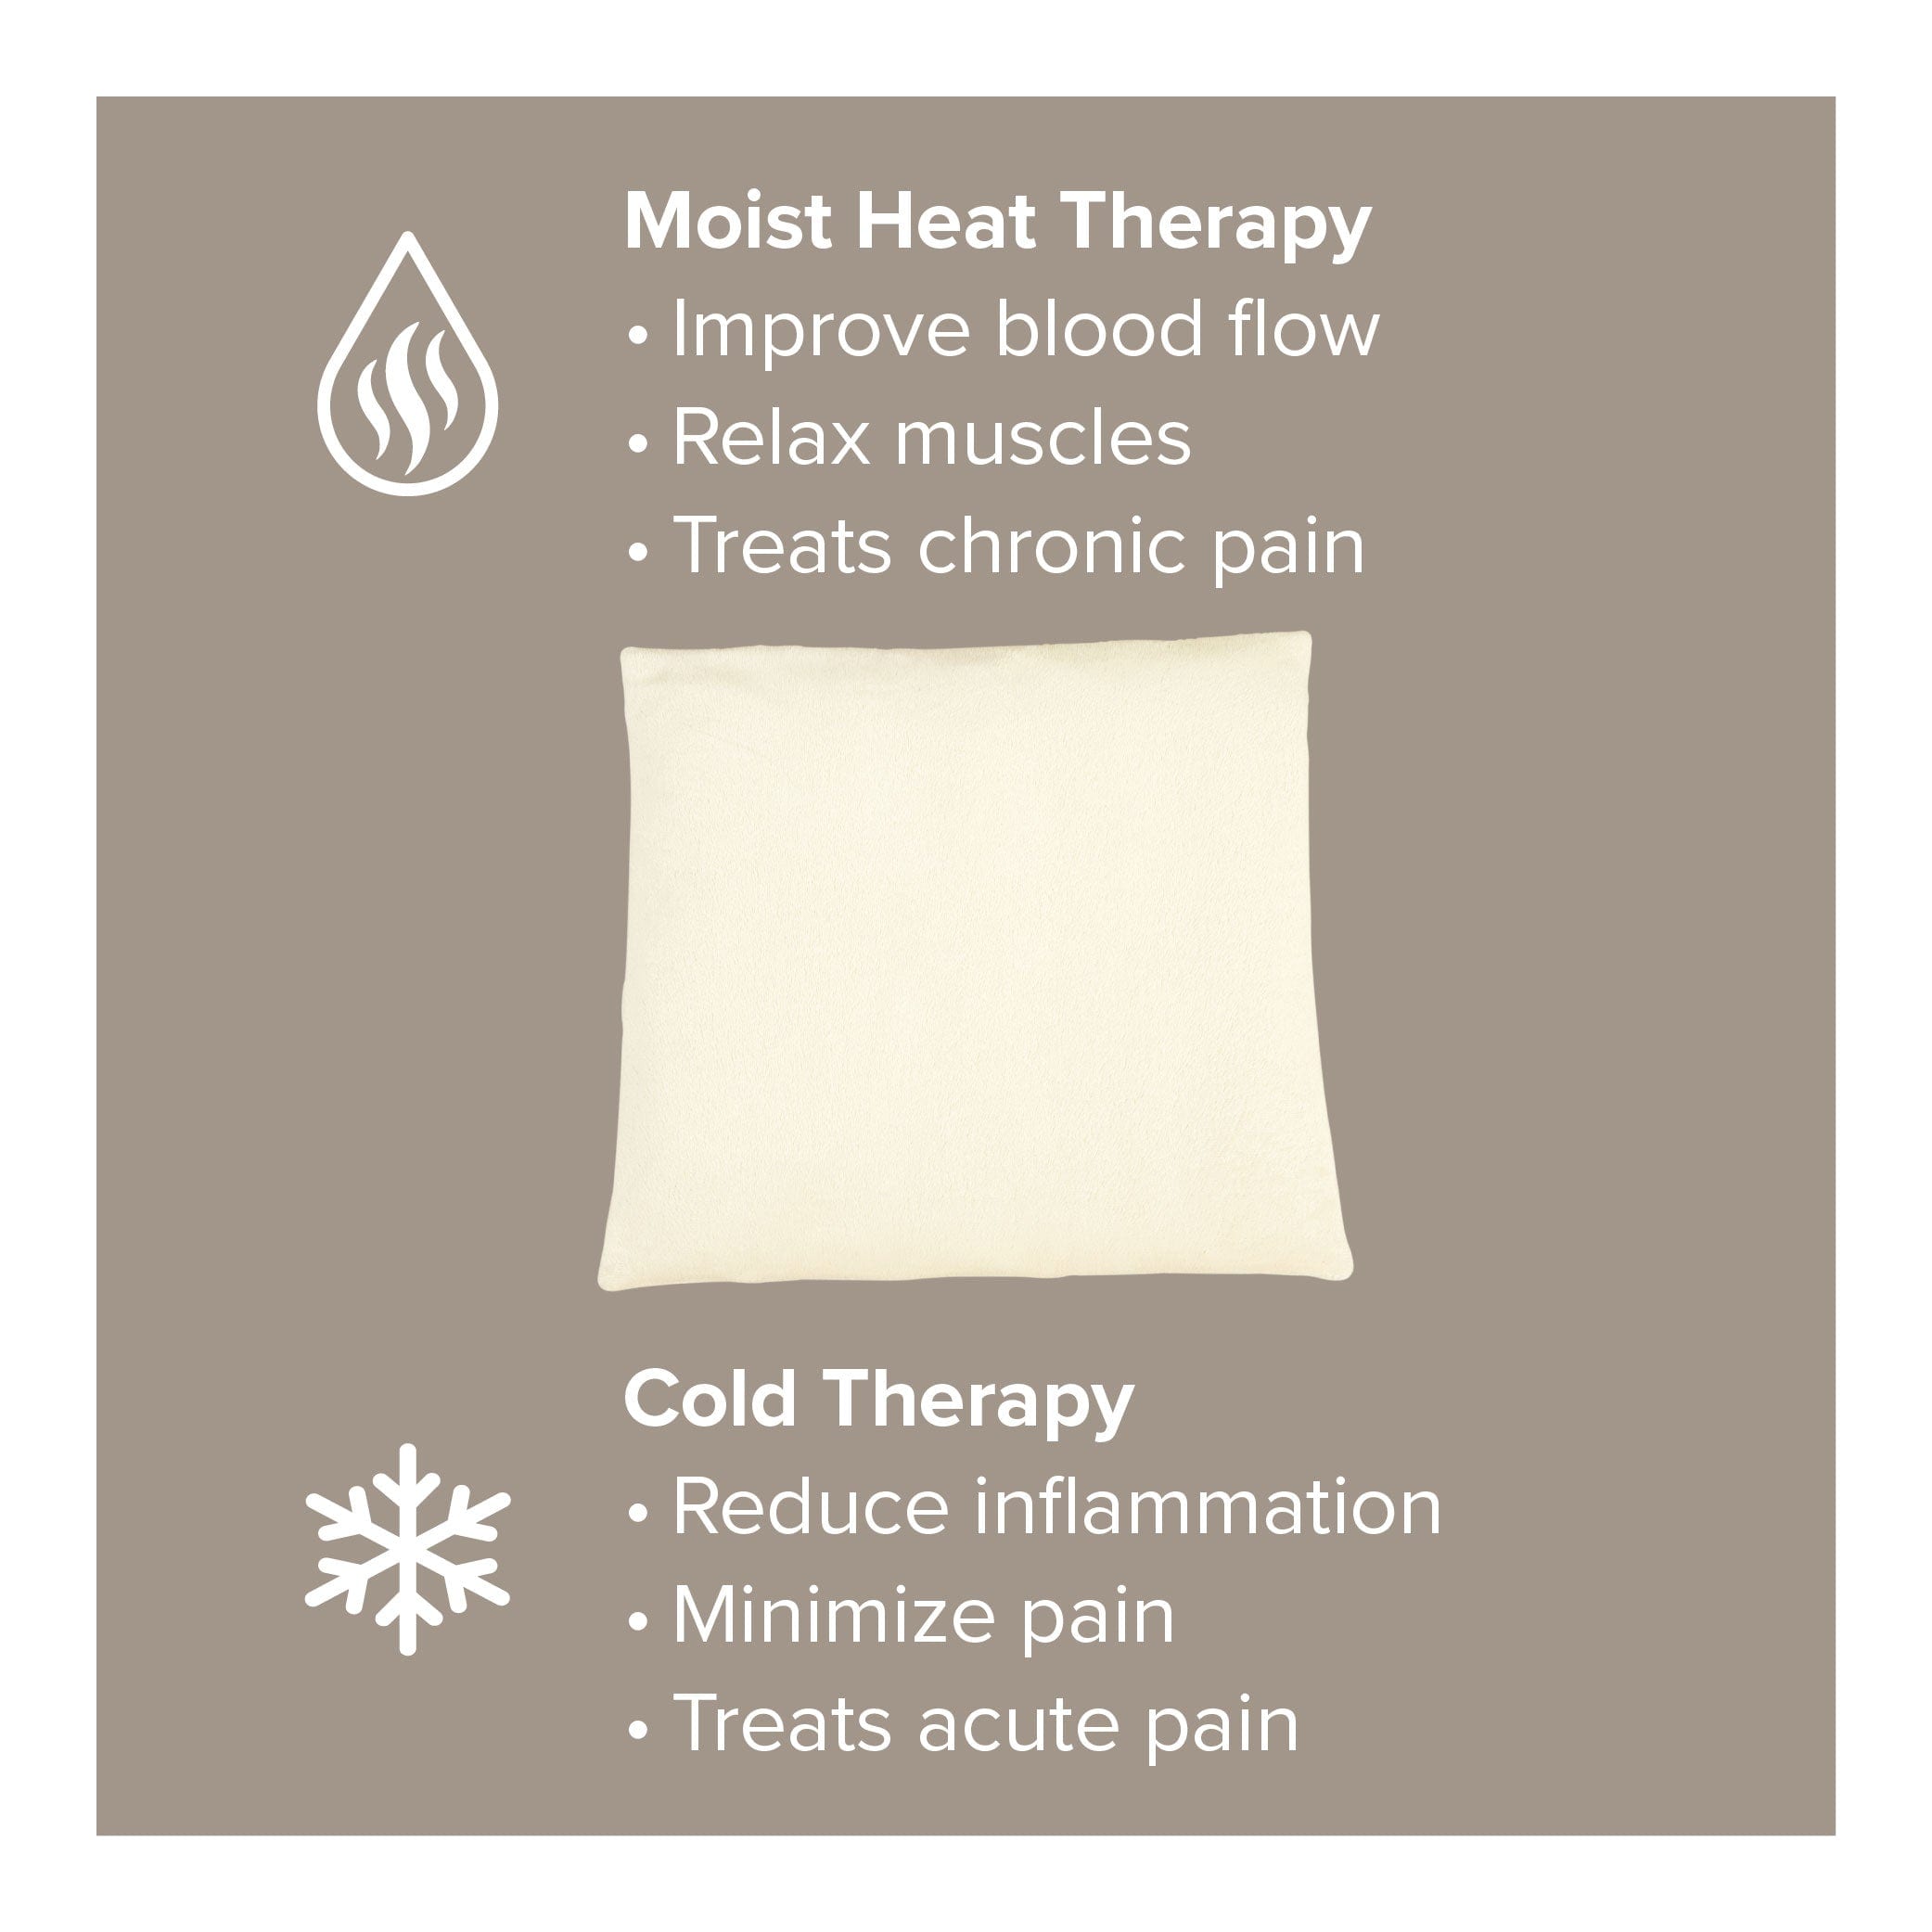 Bed Buddy Comfort Pack - Moist heat therapy to improve blood flow, relax muscles, and treat chronic pain - Cold therapy to reduce inflammation, minimize pain, and treat acute pain